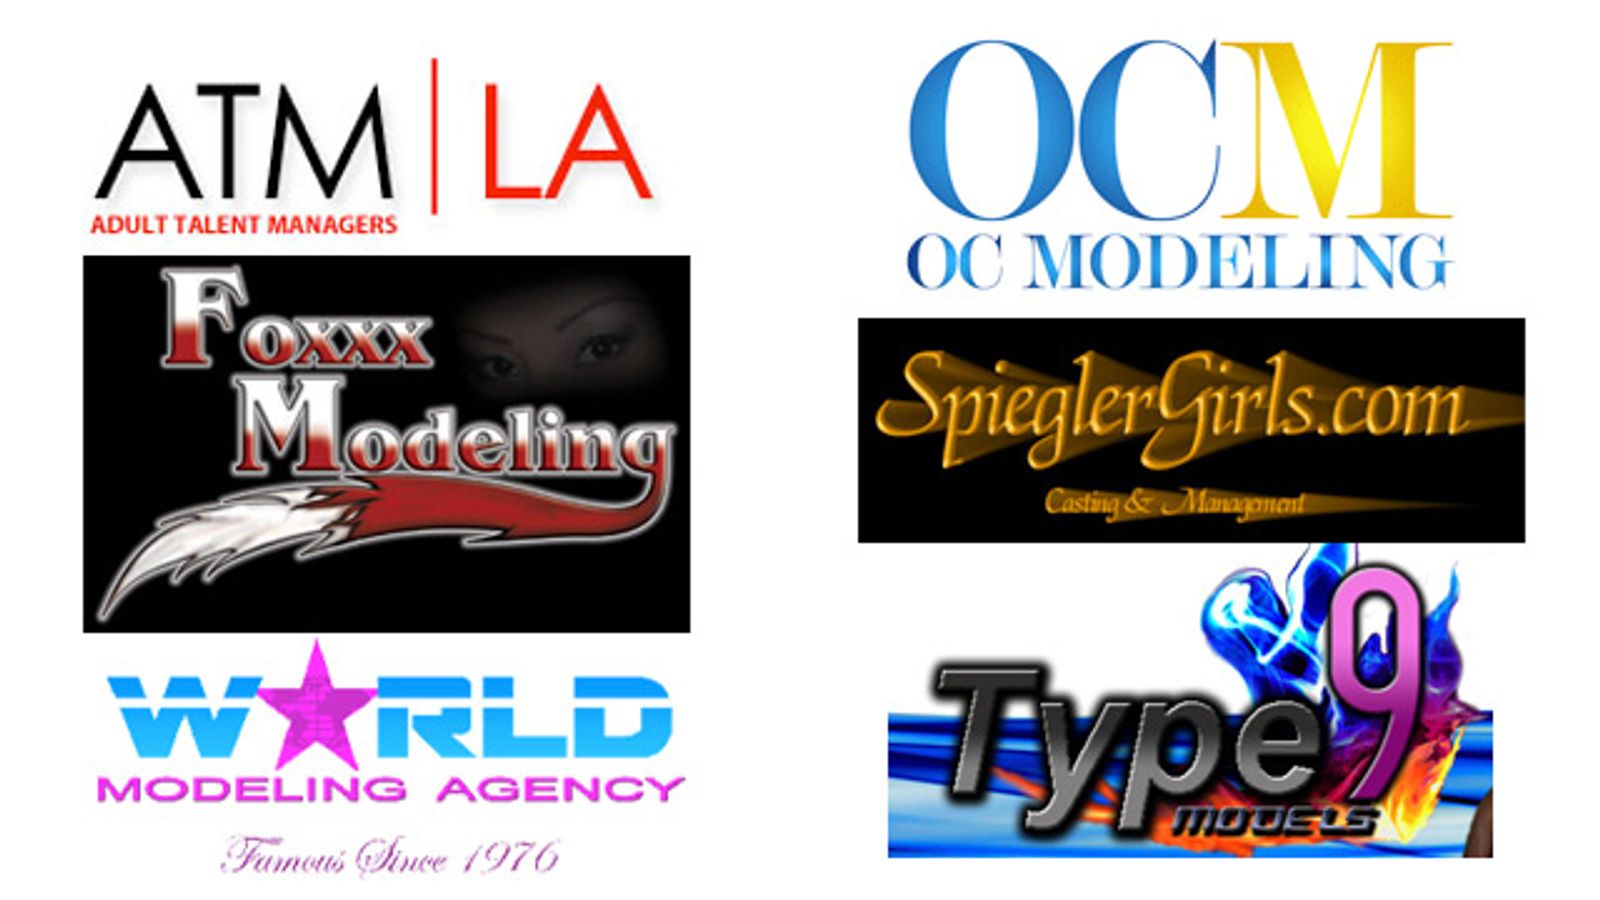 Modeling Agencies Sign on to Sponsor 2012 AEE